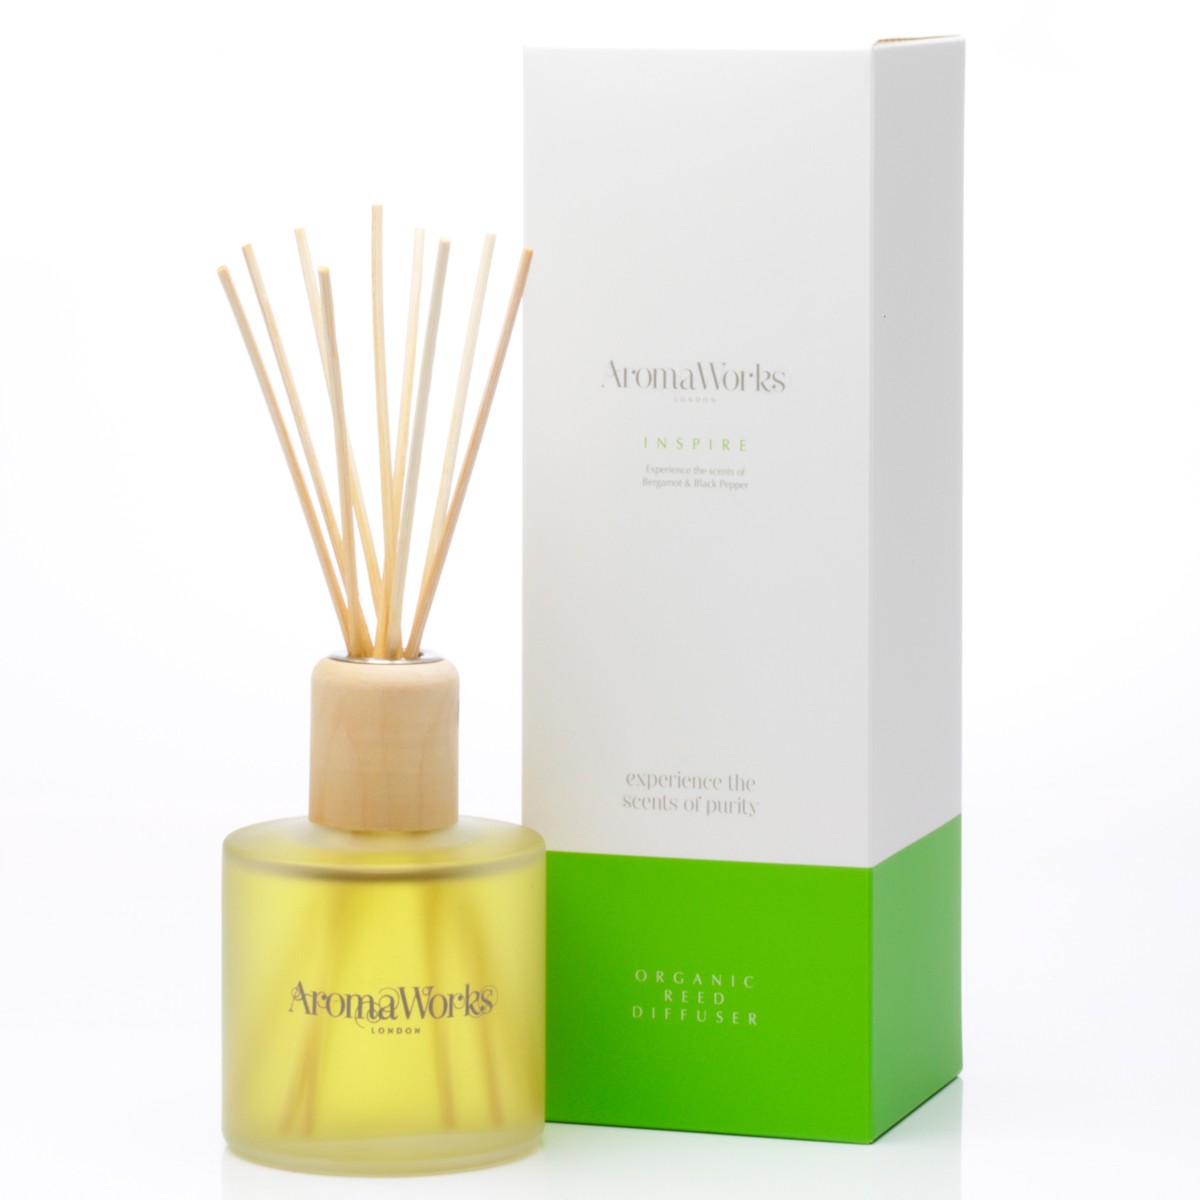 Aromaworks Inspire Reed Diffuser 